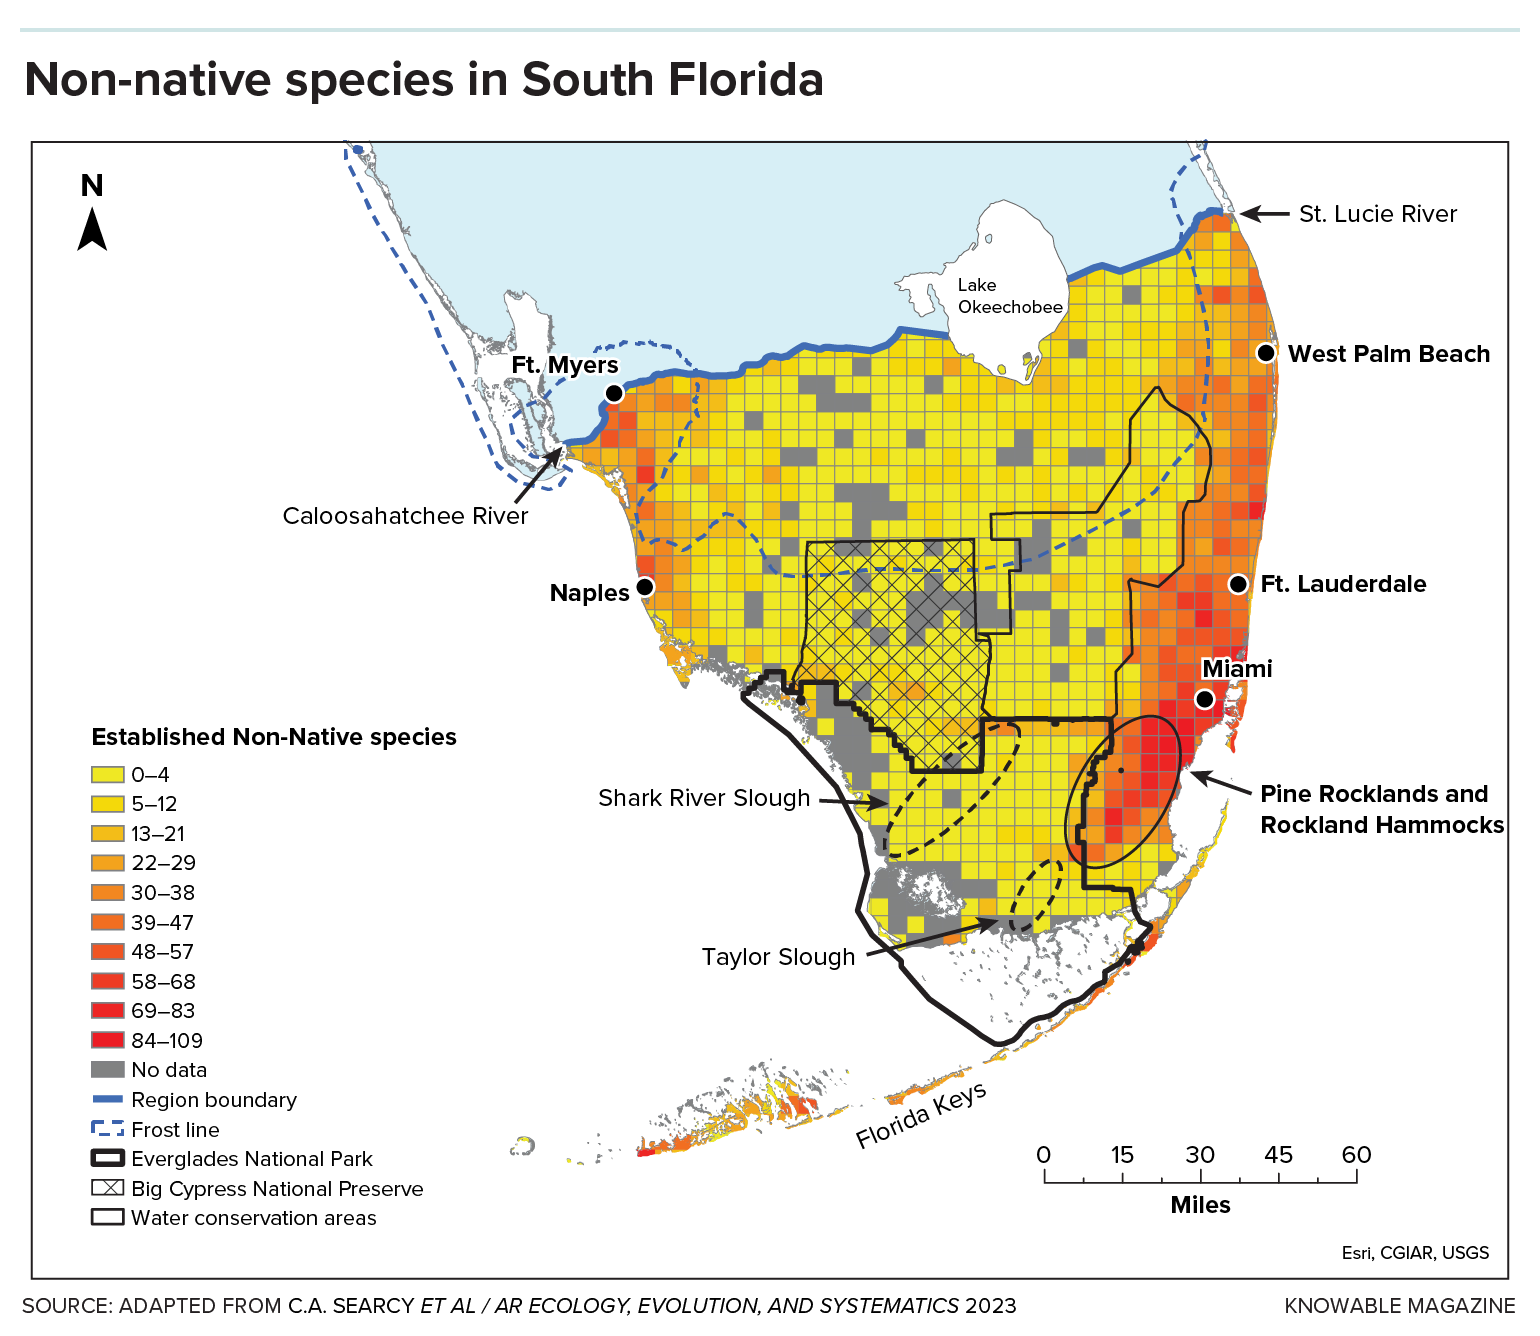 A map shows the distribution of non-native species in South Florida.